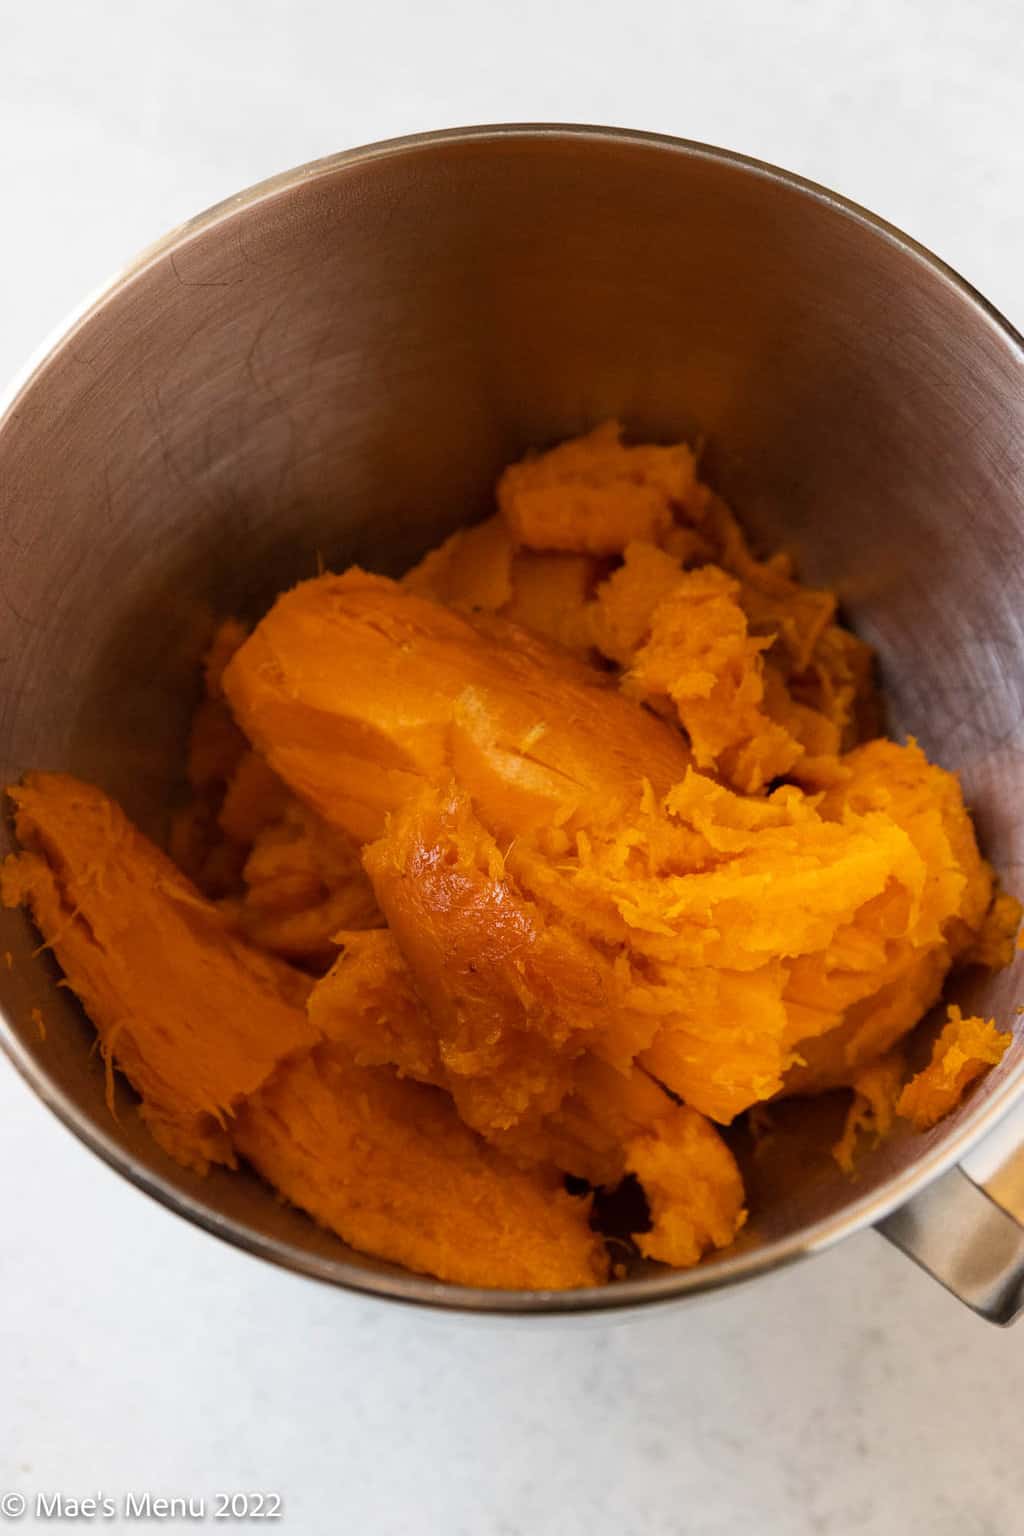 Baked sweet potato pulp in the bowl of a stand mixer.